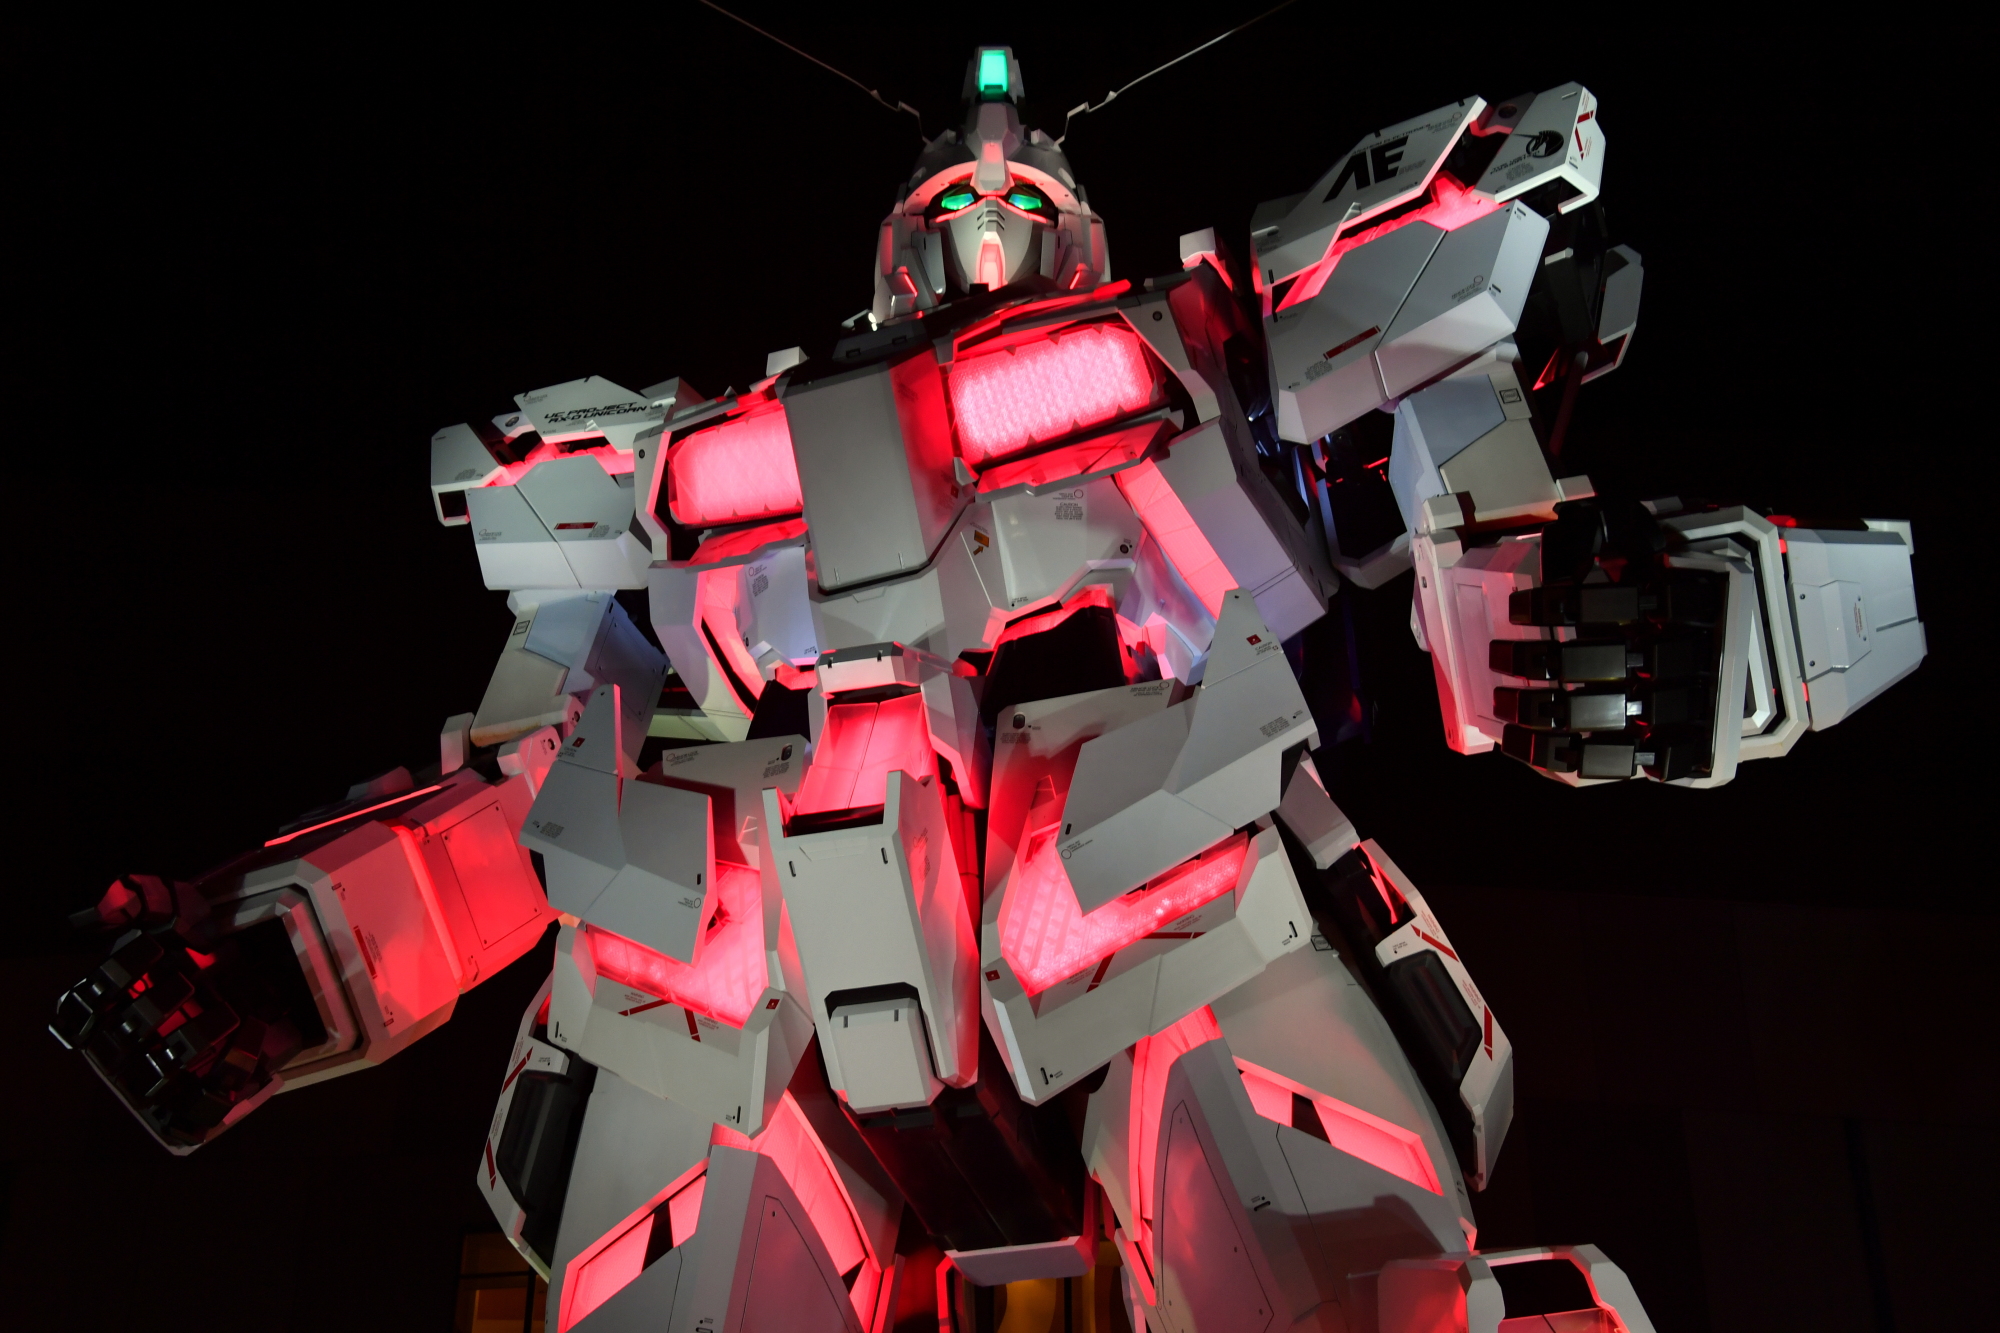 Gundam's 20-meter replacement statue unveiled in Odaiba | The Japan Times